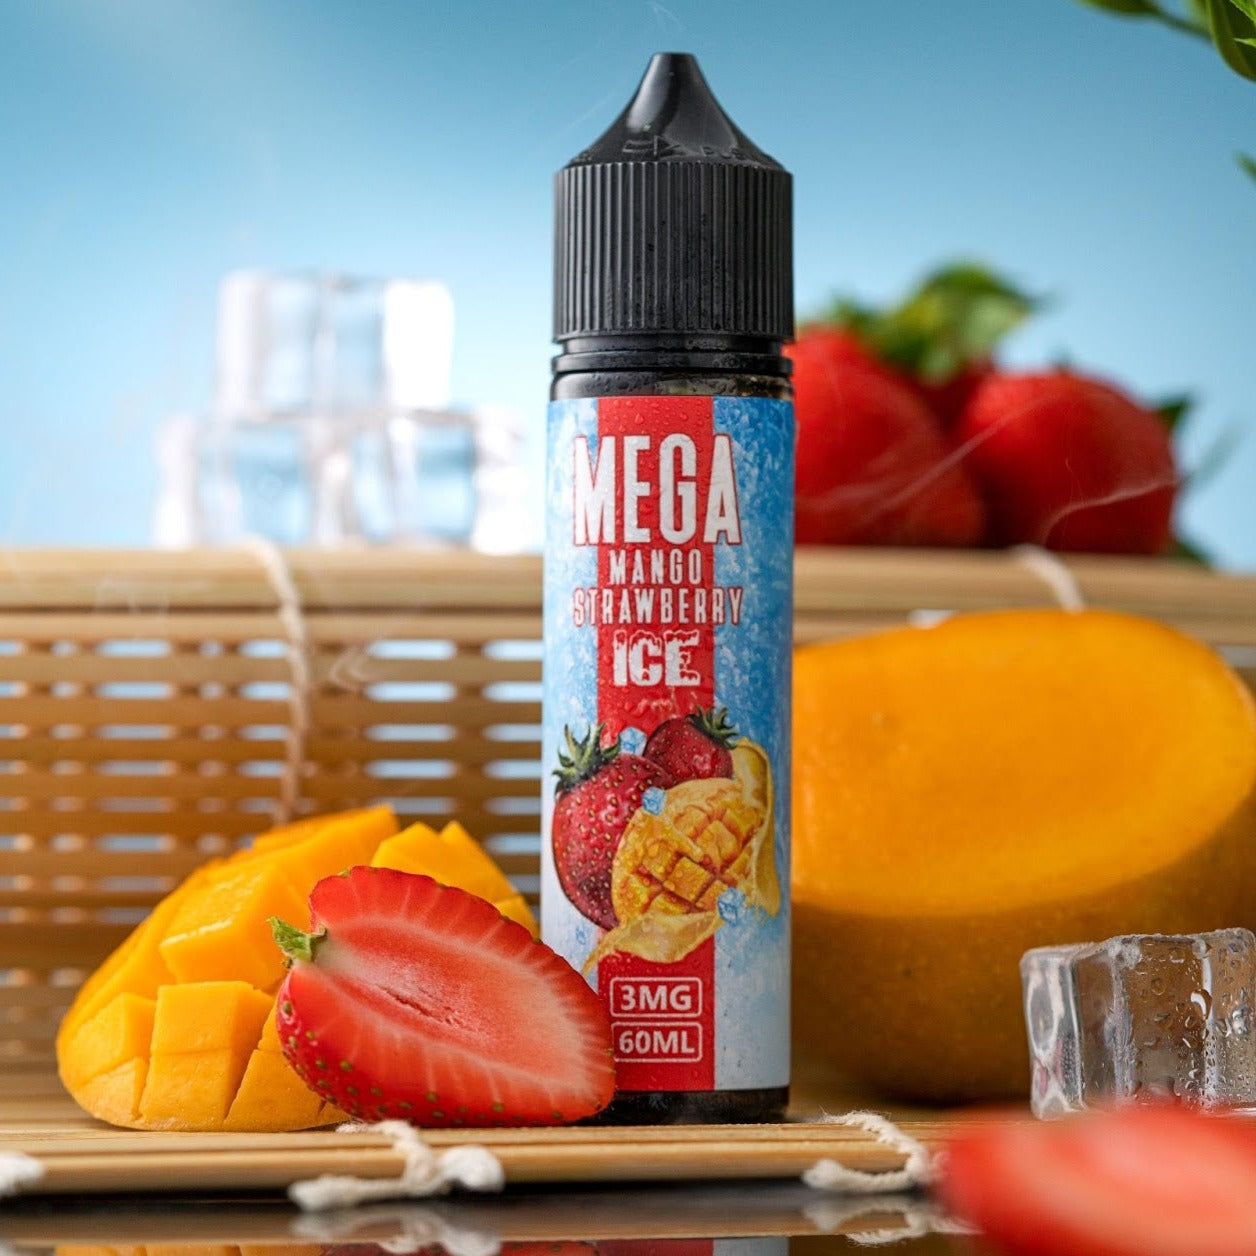 Mega Mango Strawberry Ice e-liquid by GRAND - A tropical fusion of mango and strawberry with a refreshing icy twist.